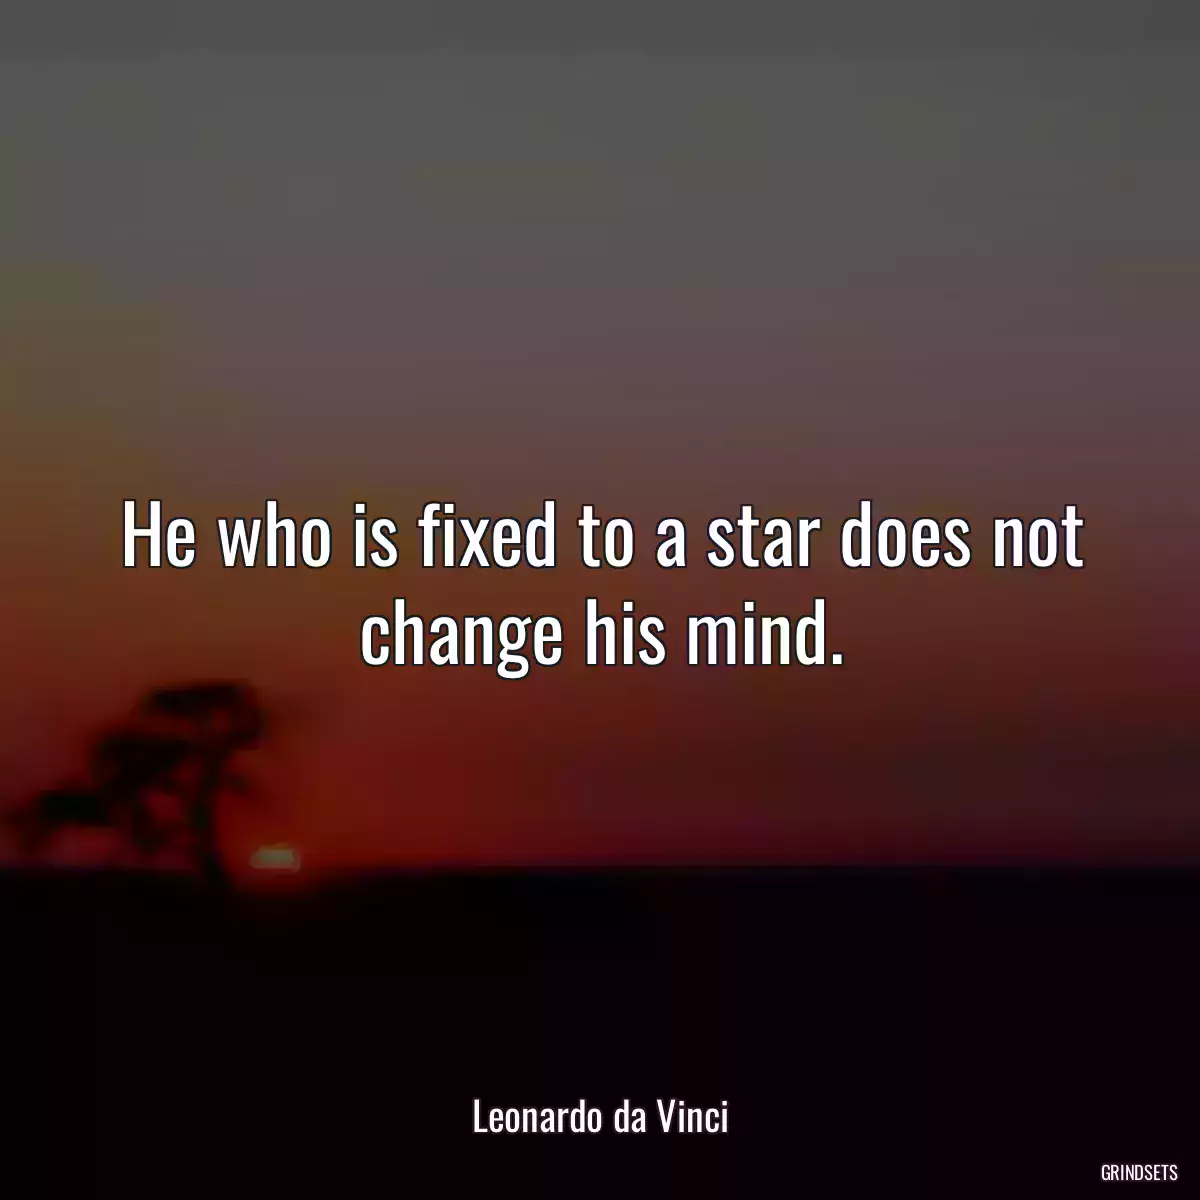 He who is fixed to a star does not change his mind.